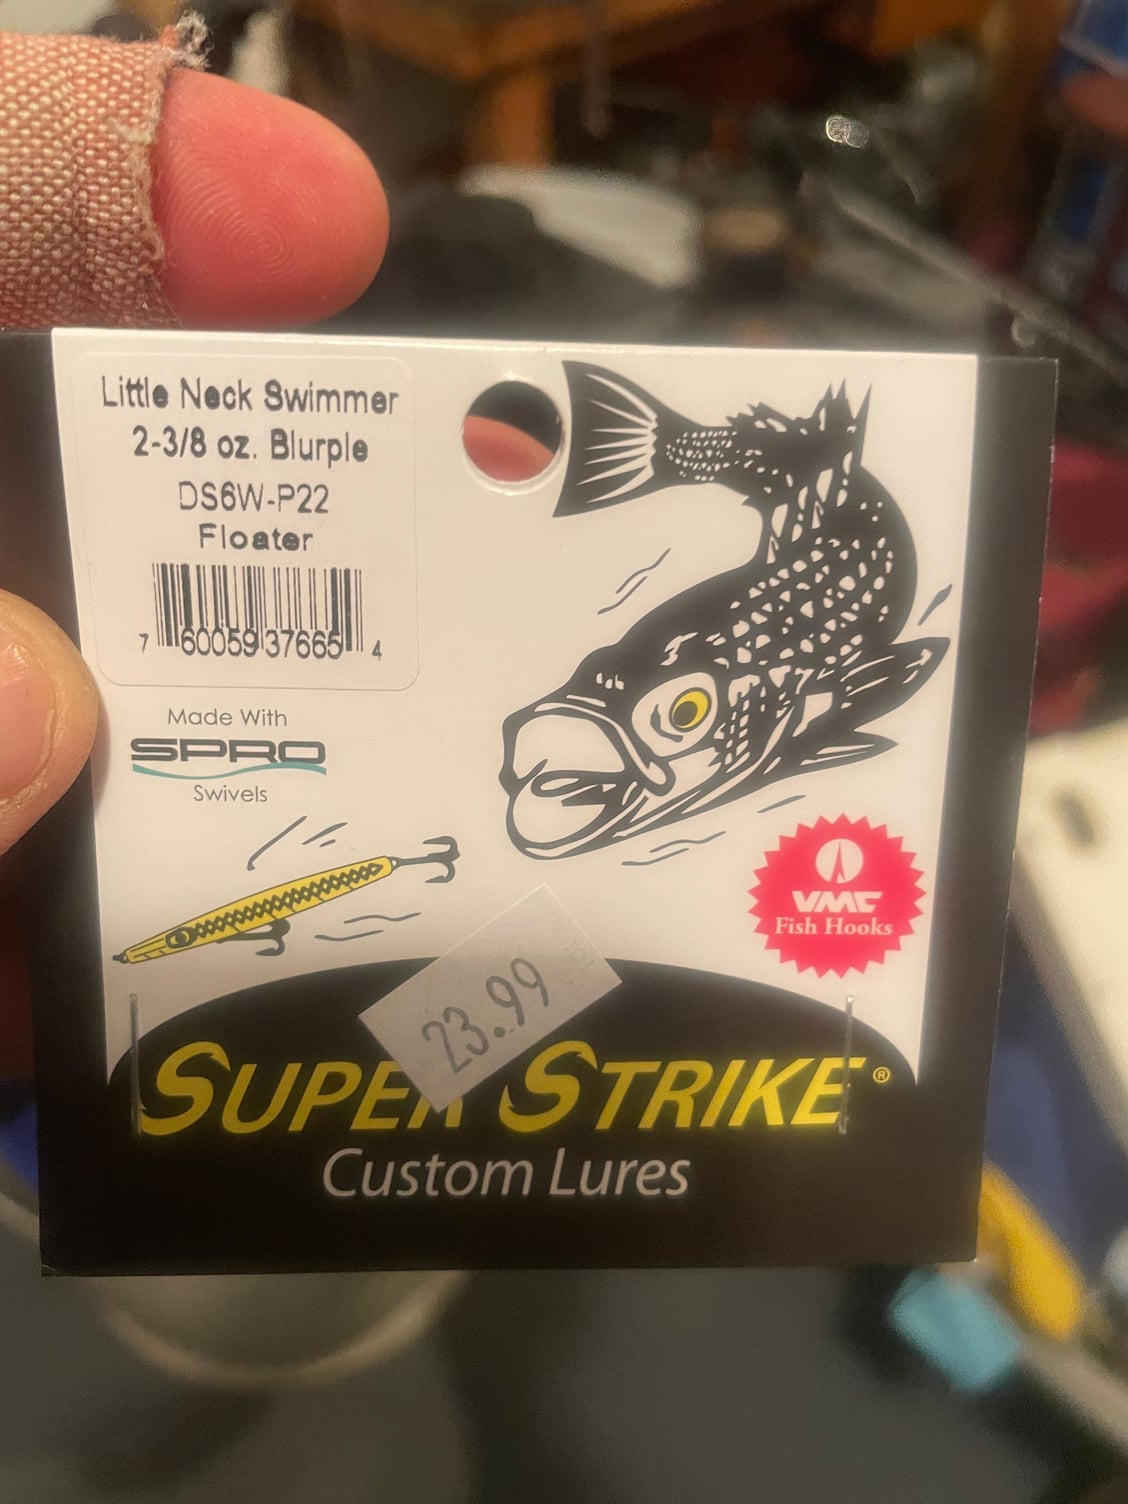 Super Strike Lures - The Hull Truth - Boating and Fishing Forum